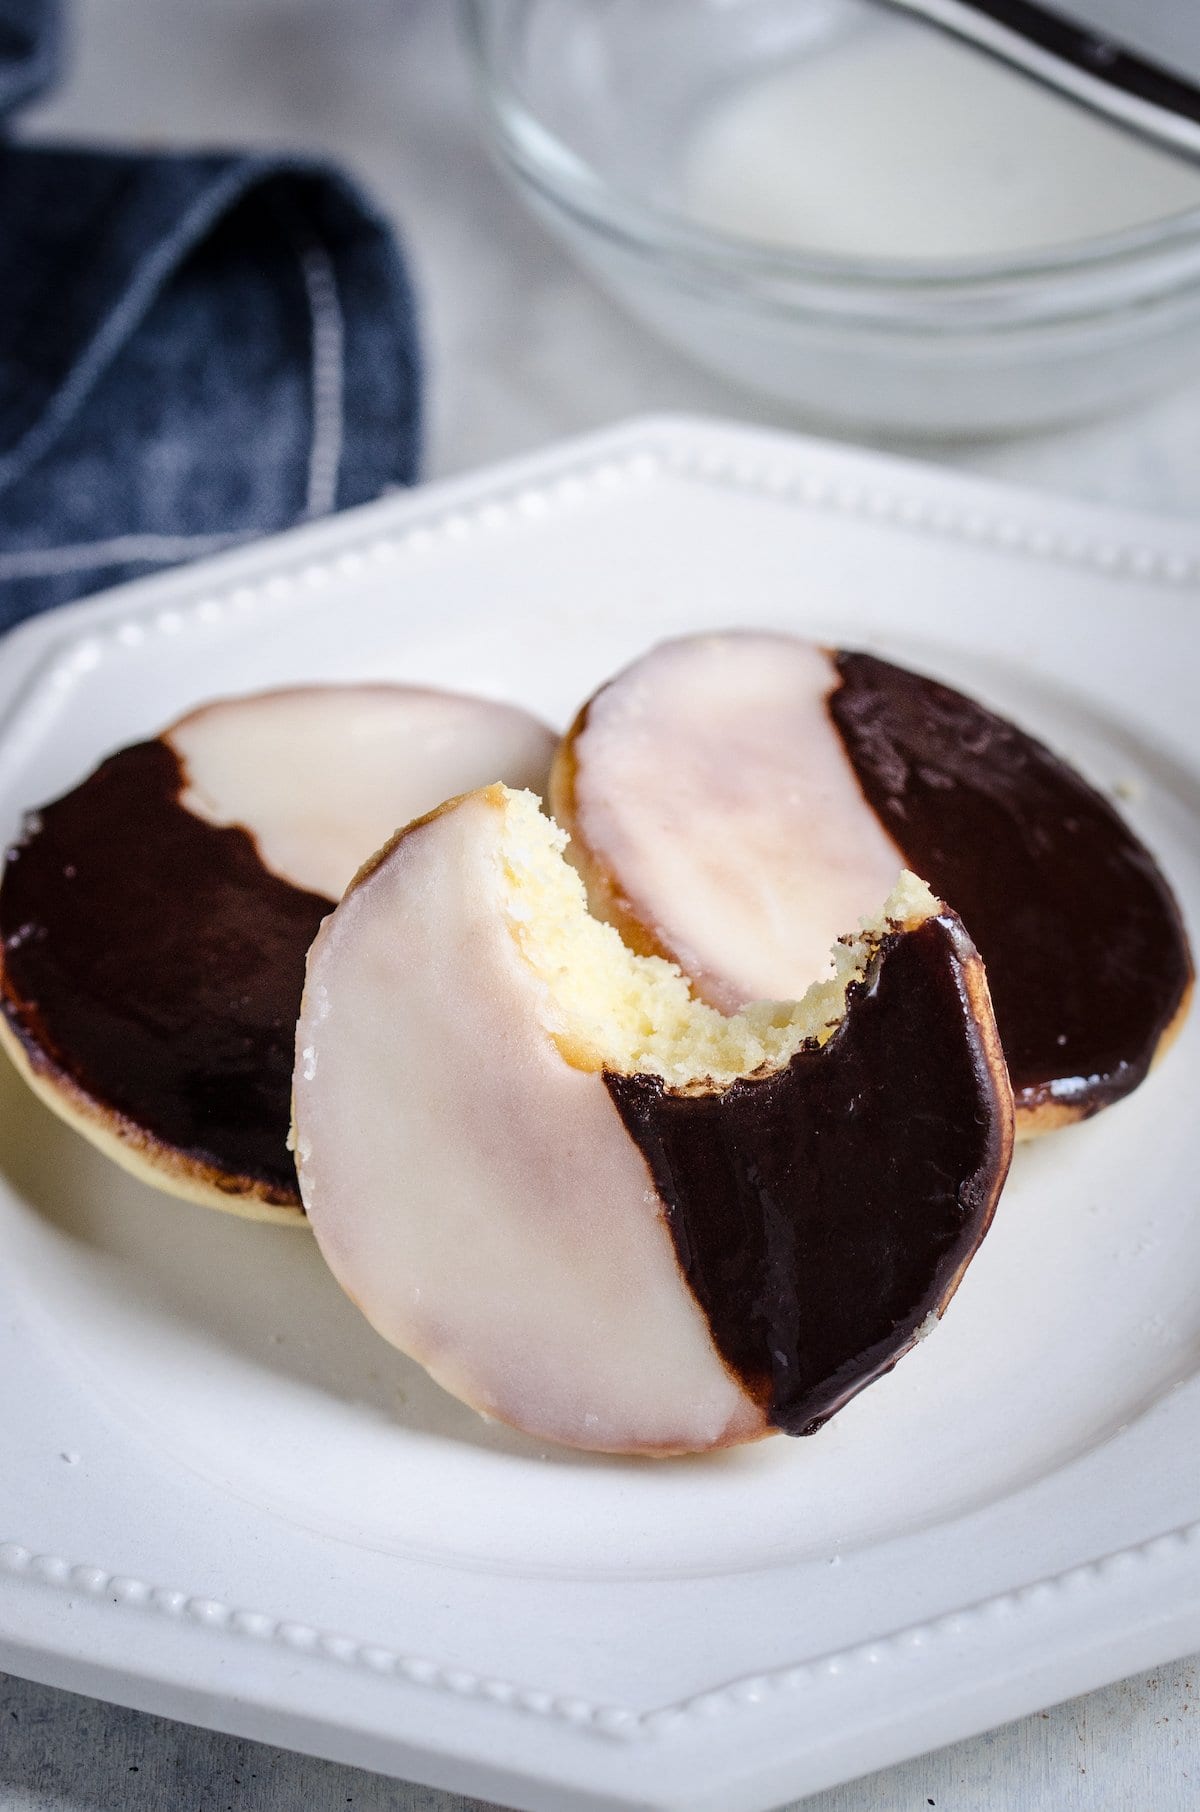 Black and white cookies on a plate, one with a bite missing.